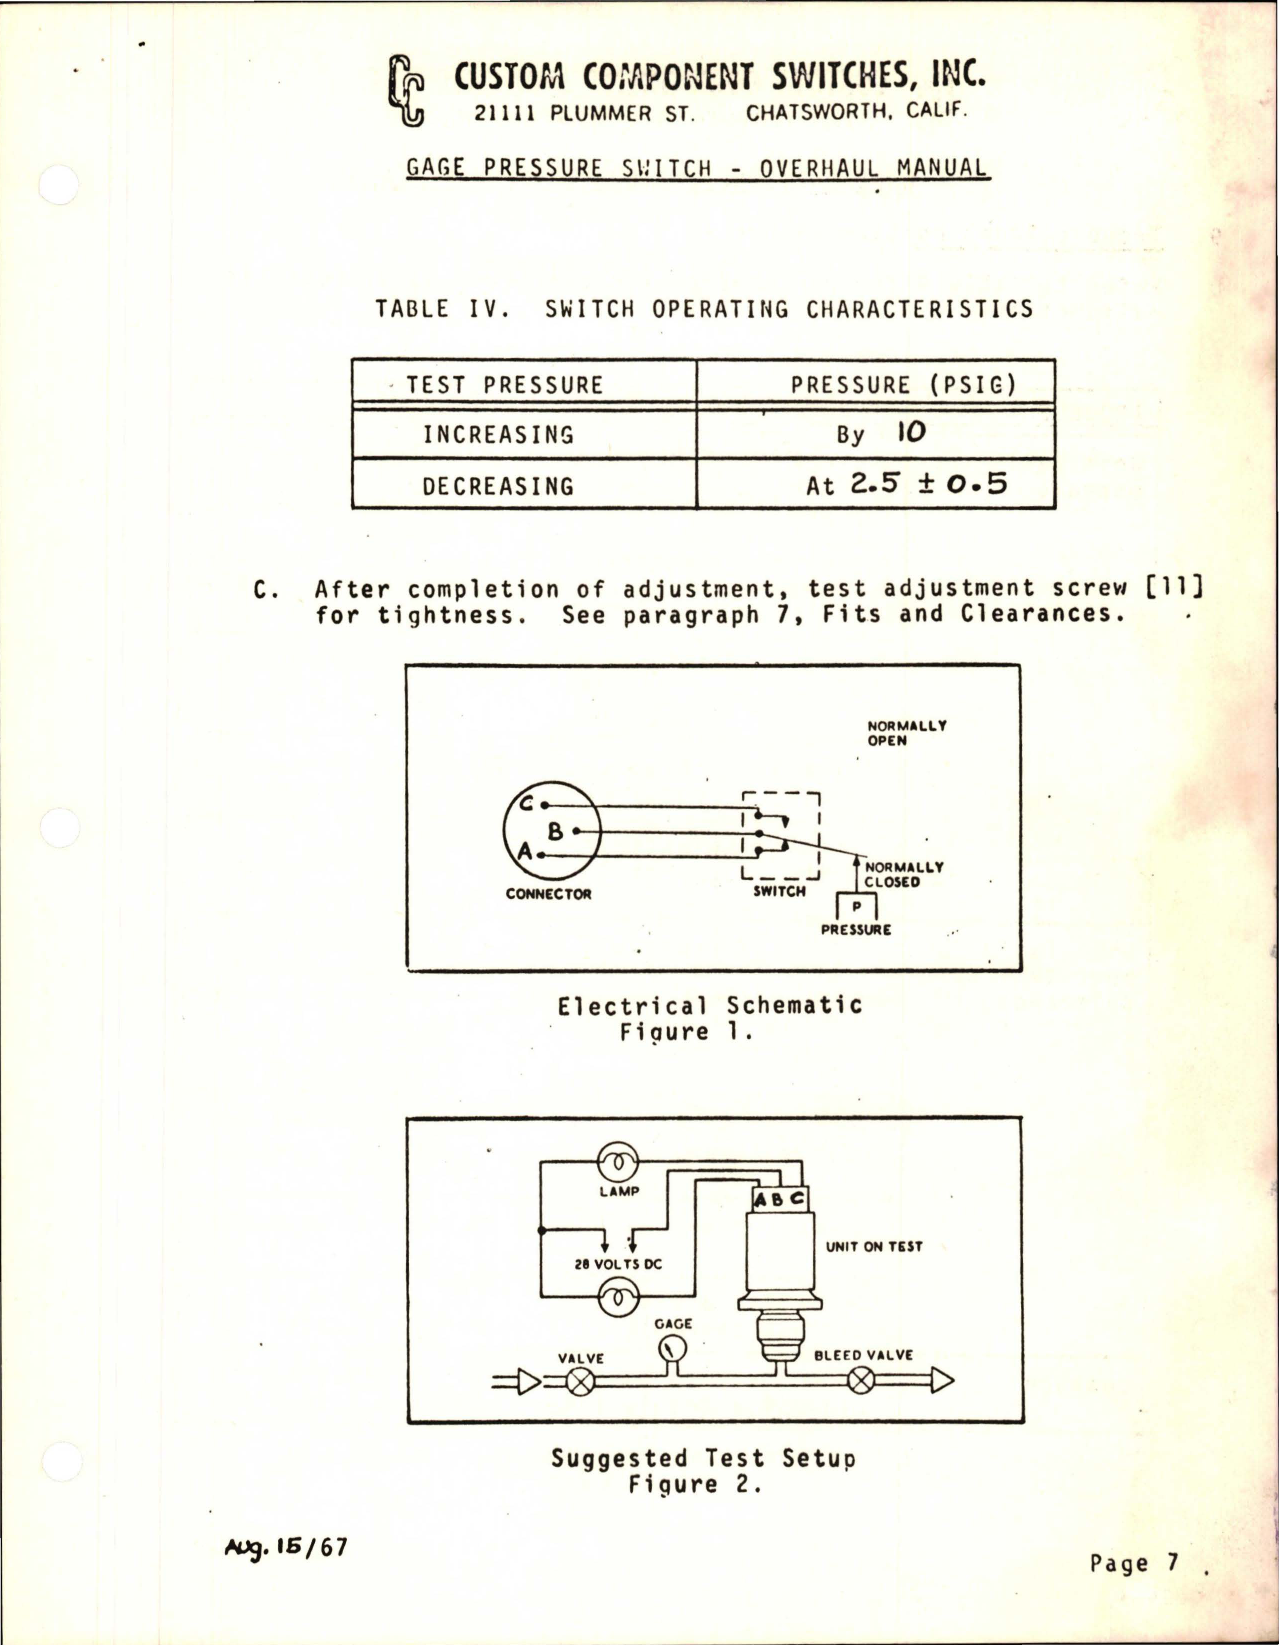 Sample page 7 from AirCorps Library document: Overhaul Manual for Gage Pressure Switch - Part 8G361 and 8G361-1